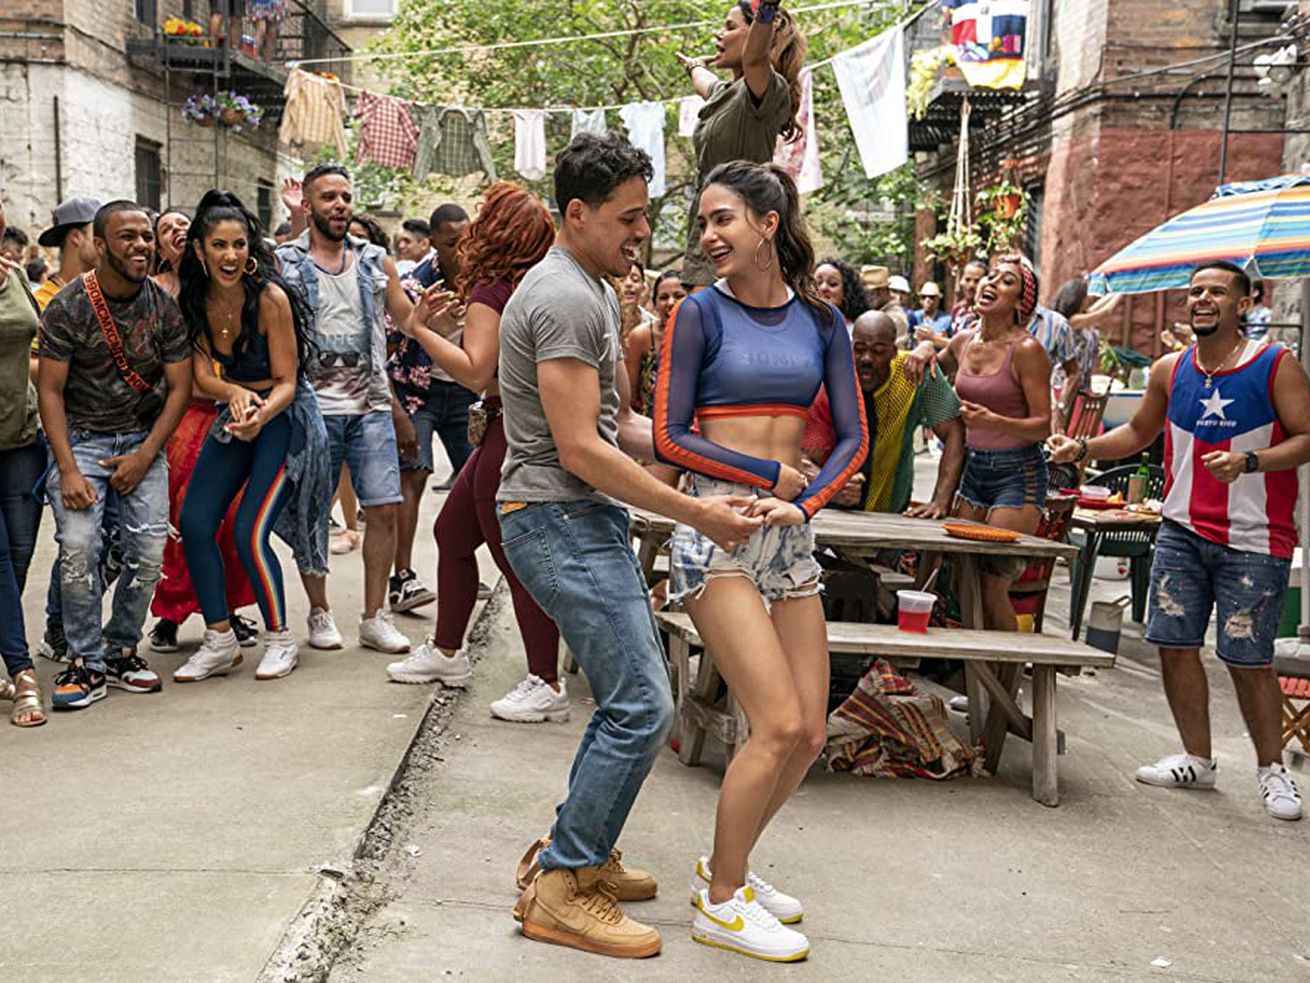 The long-awaited In the Heights movie is electrifying and perfectly timed